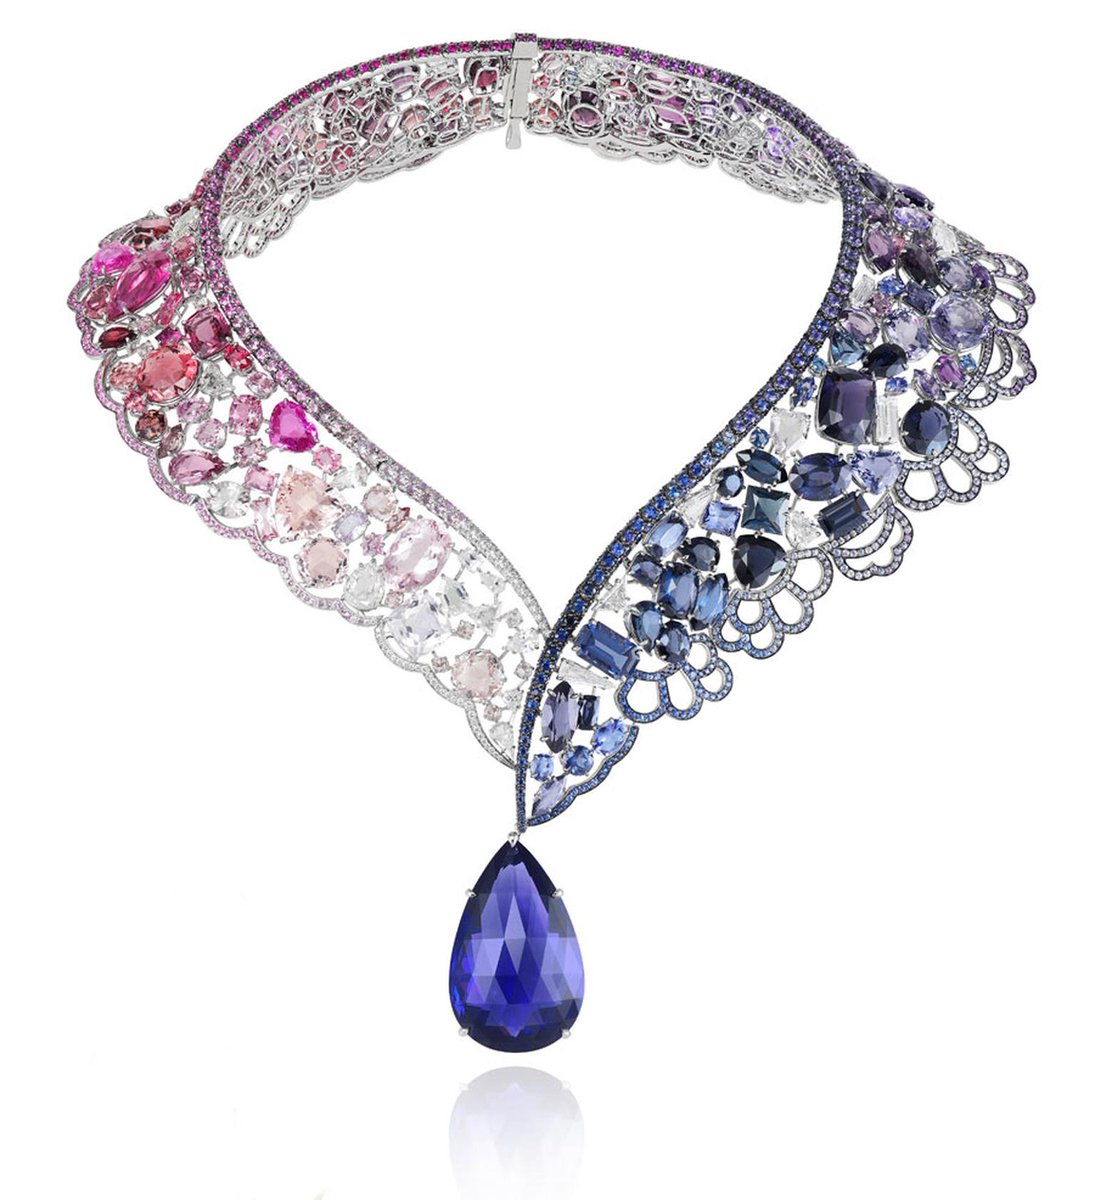 CHOPARD'S DISNEY PRINCESS COLLECTION!! This is Belle. GIMMIE. Gotta be sapphires in there but IIRC the briolette drops are all tanzanite.